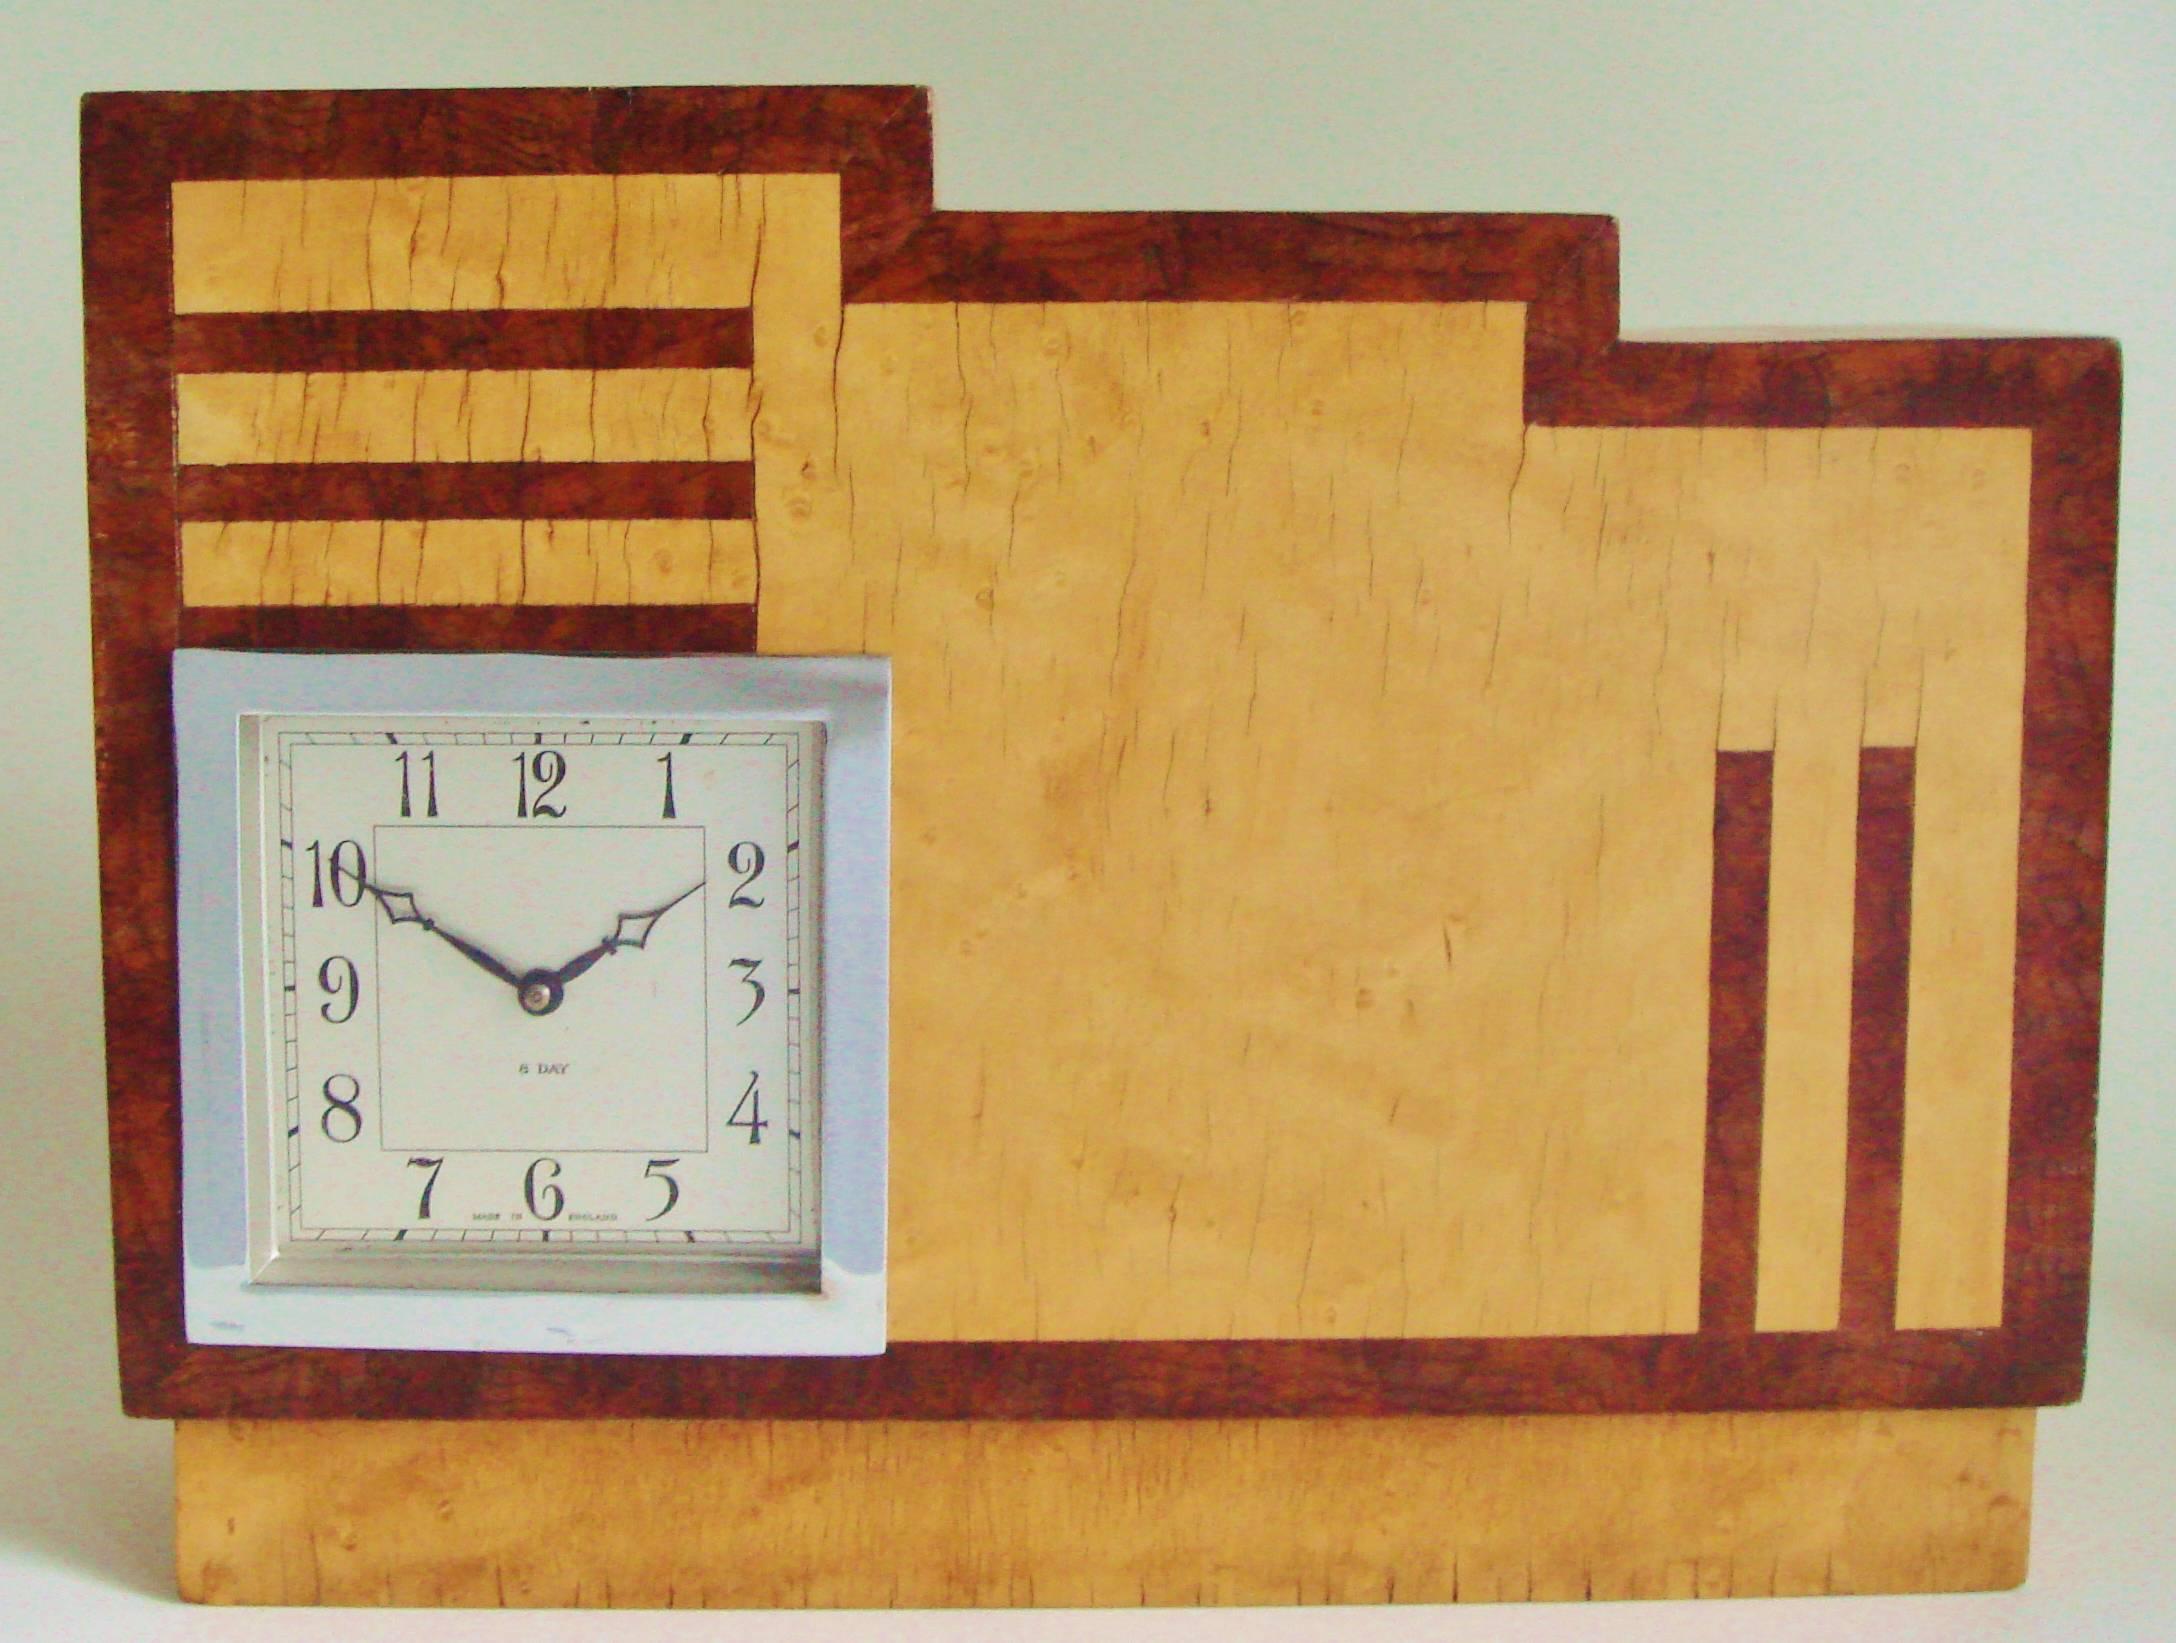 This extremely architectural English Art Deco mechanical mantle clock features a geometric inlaid veneered pattern of blonde birds-eye maple contrasted with burl walnut. The body of the clock is cut from a laminated block of wood that is